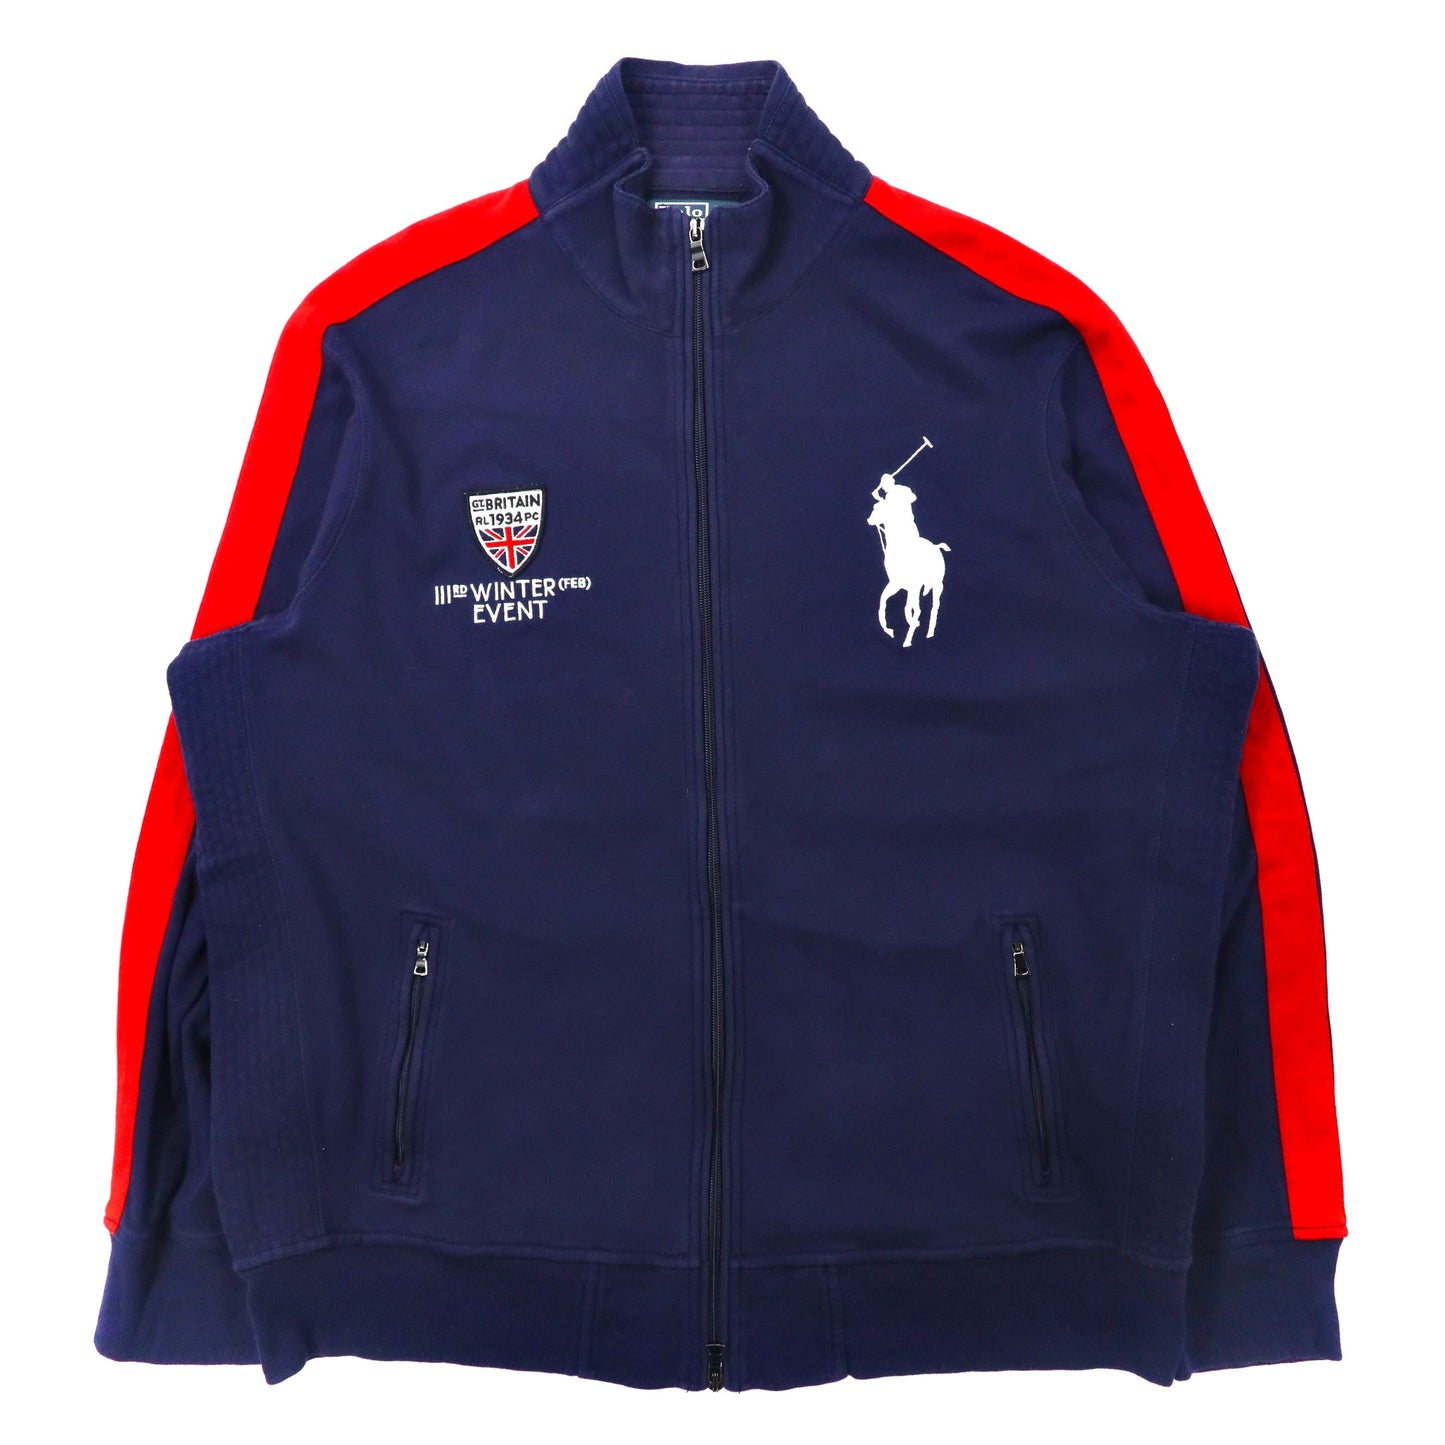 POLO by RALPH LAUREN TRACK JACKET Jersey XL Navy Cotton Side Line 